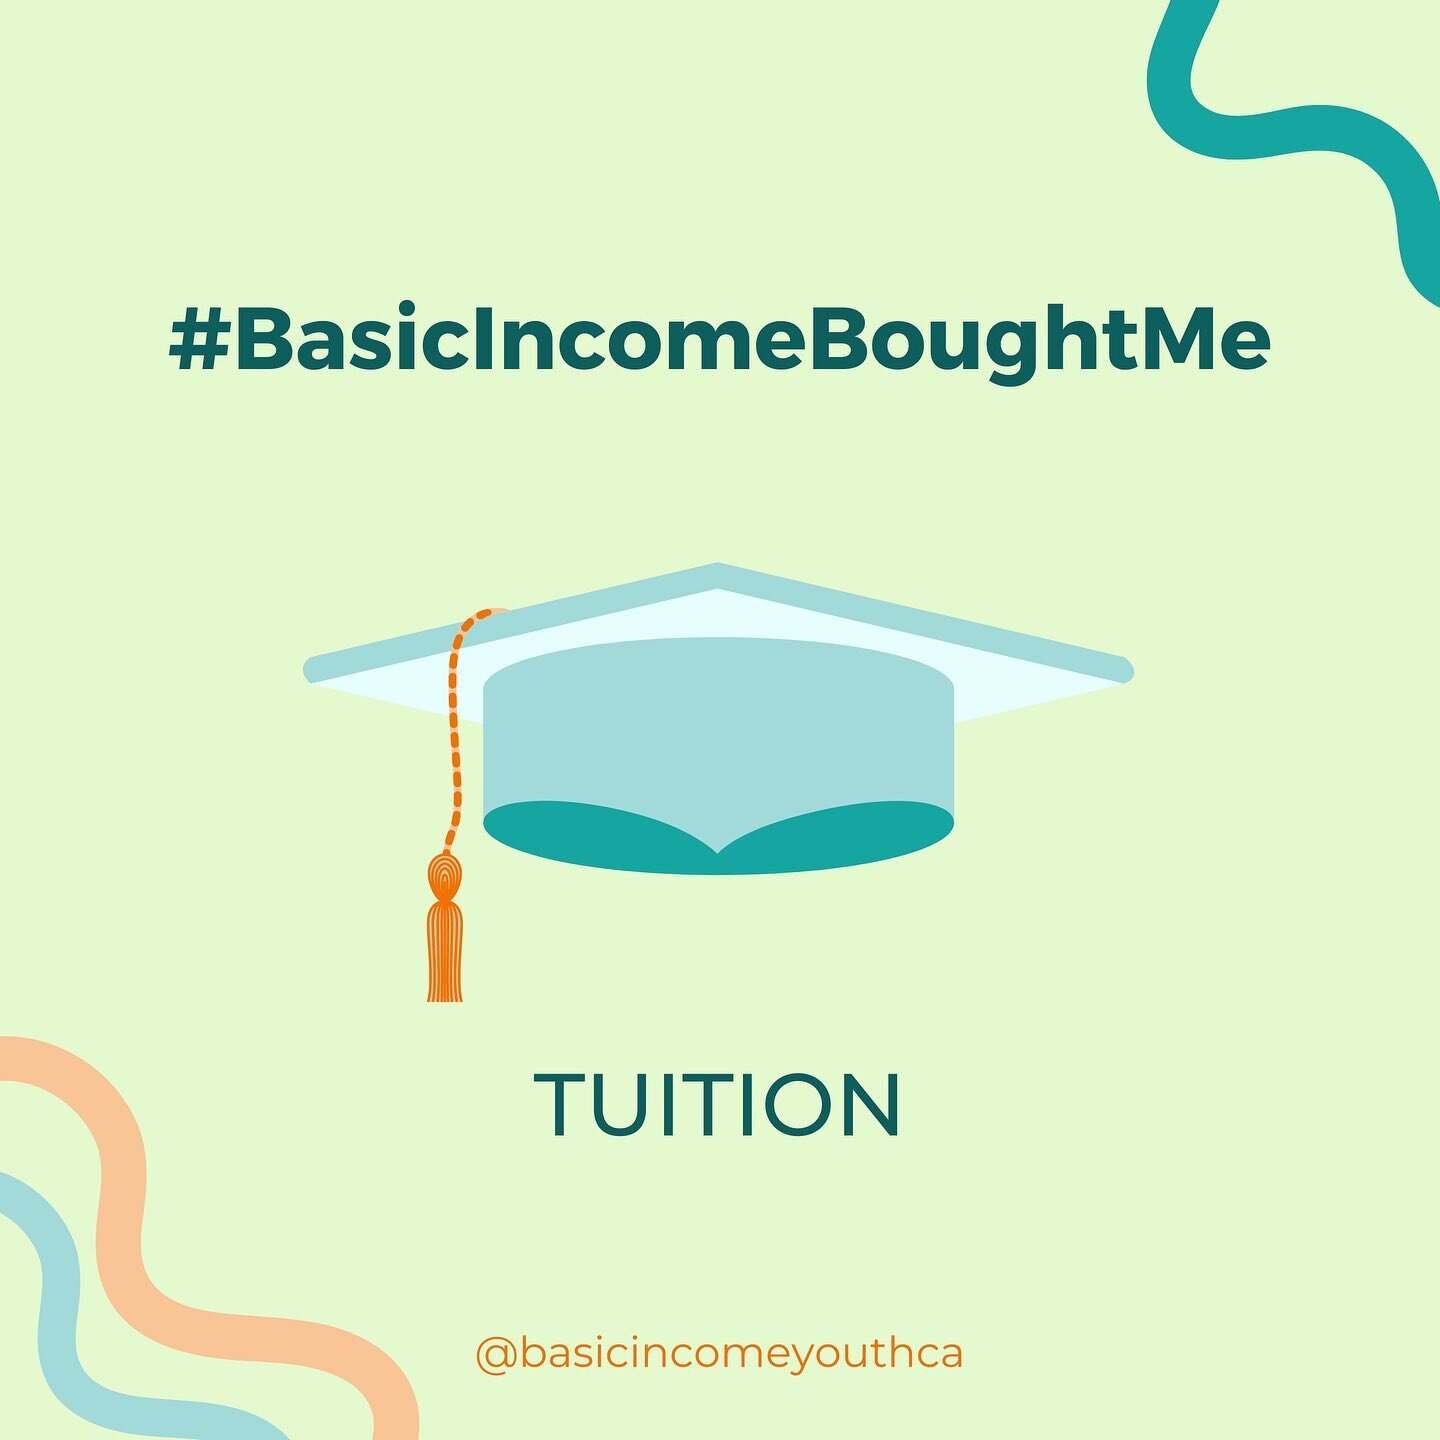 The sense of accomplishment from receiving your diploma or degree is priceless, but financial barriers continue to keep too many people from starting - and finishing - school. For this OBIP participant, #BasicIncomeBoughtMe the tuition to finish thei